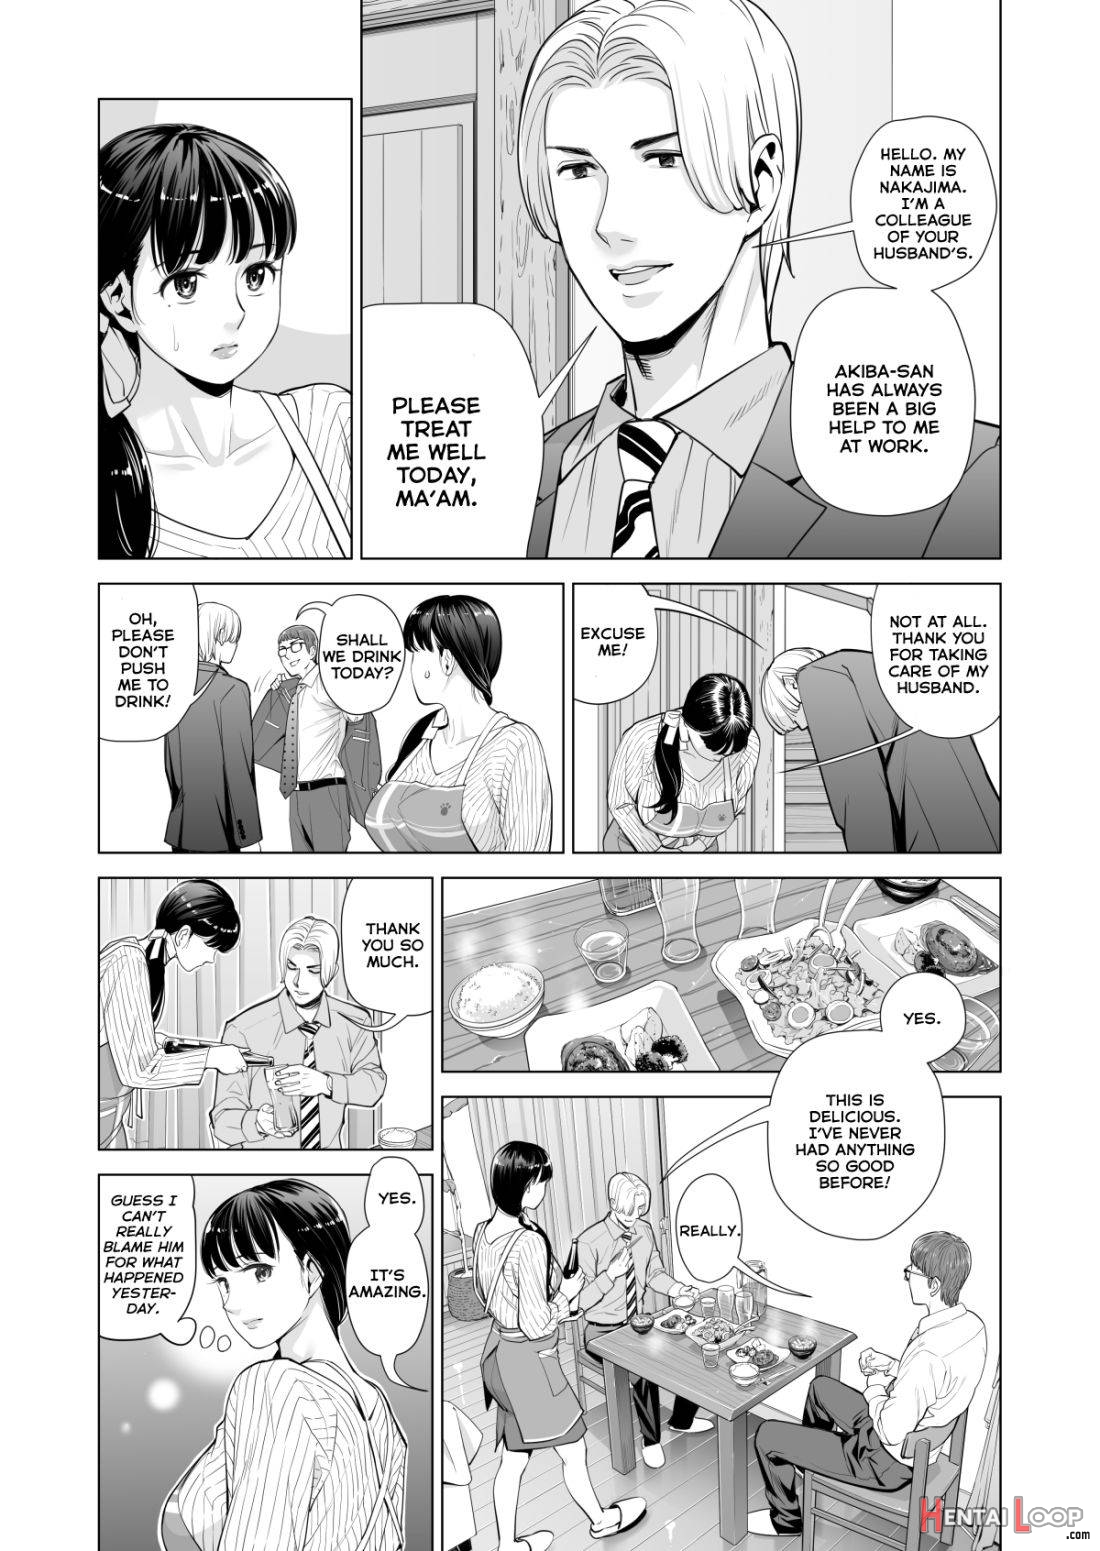 Tsukiyo no Midare Zake (Zenpen) Moonlit Intoxication ~ A Housewife Stolen by a Coworker Besides her Blackout Drunk Husband ~ Chapter 1 page 21